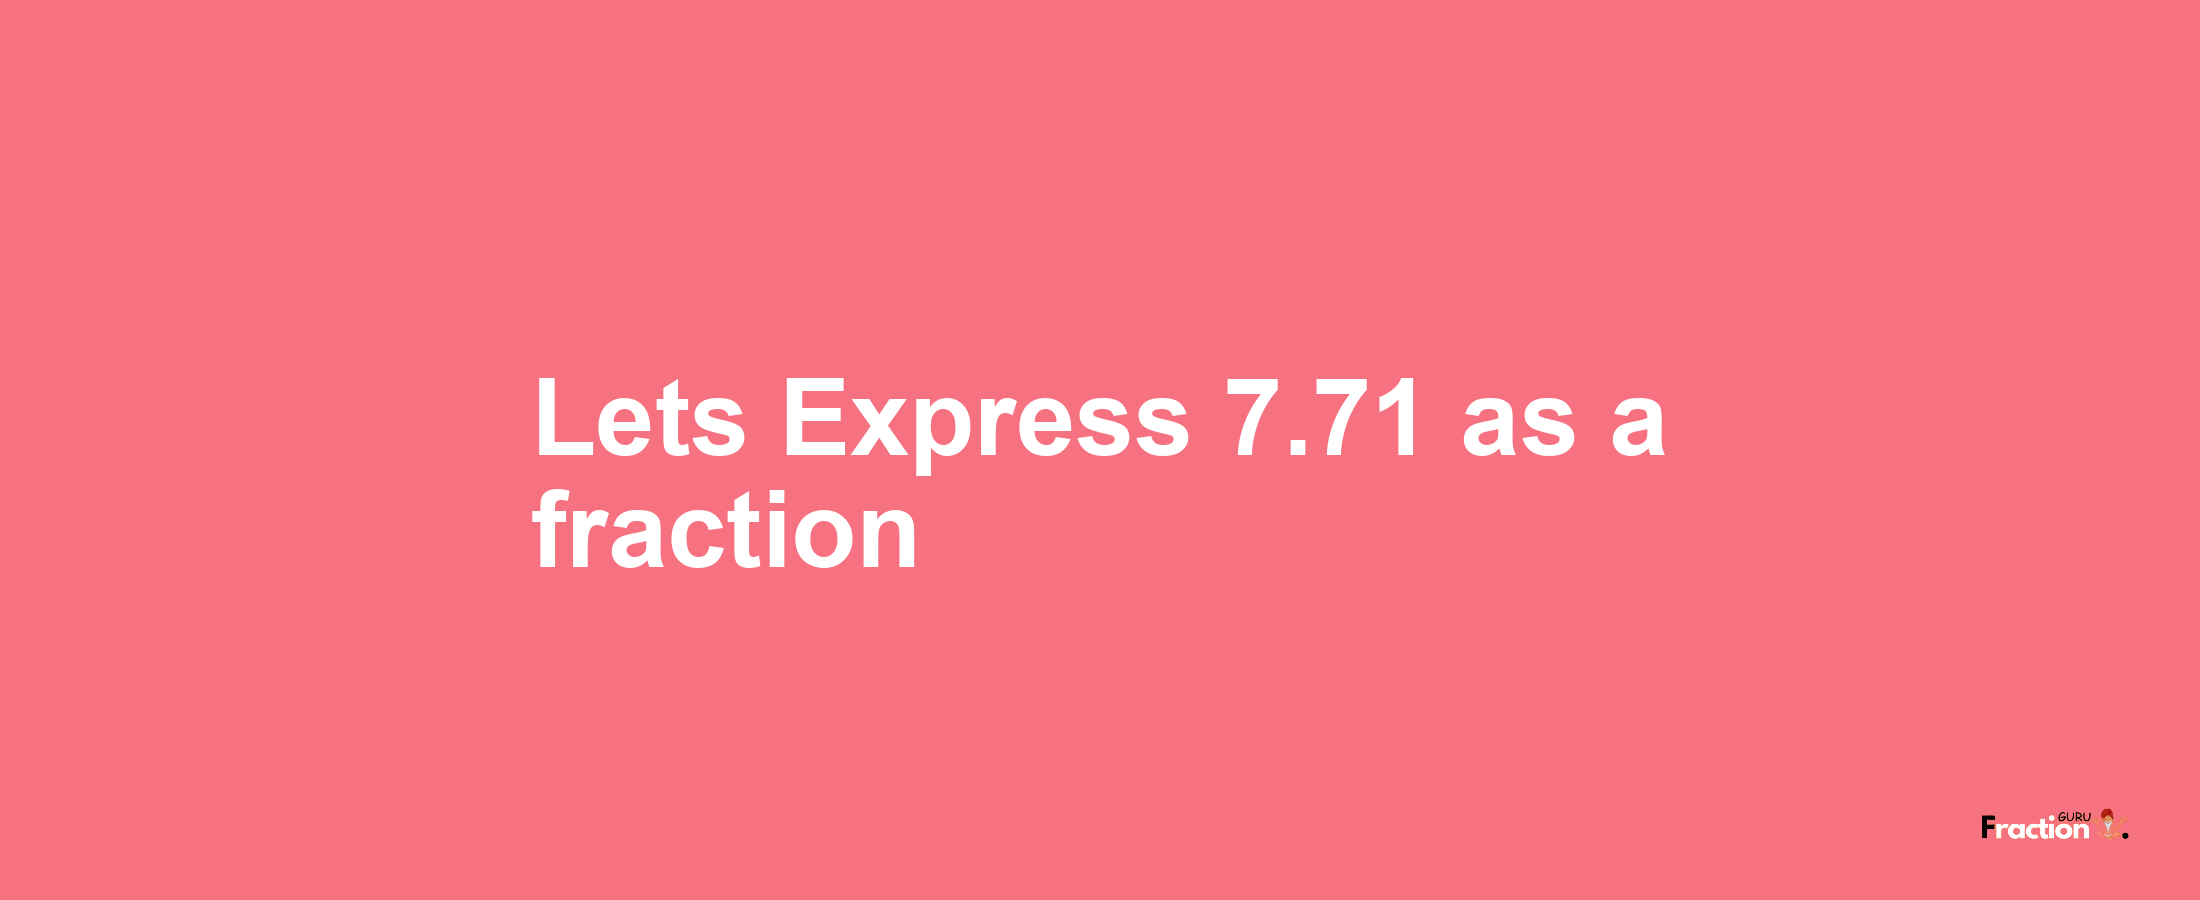 Lets Express 7.71 as afraction